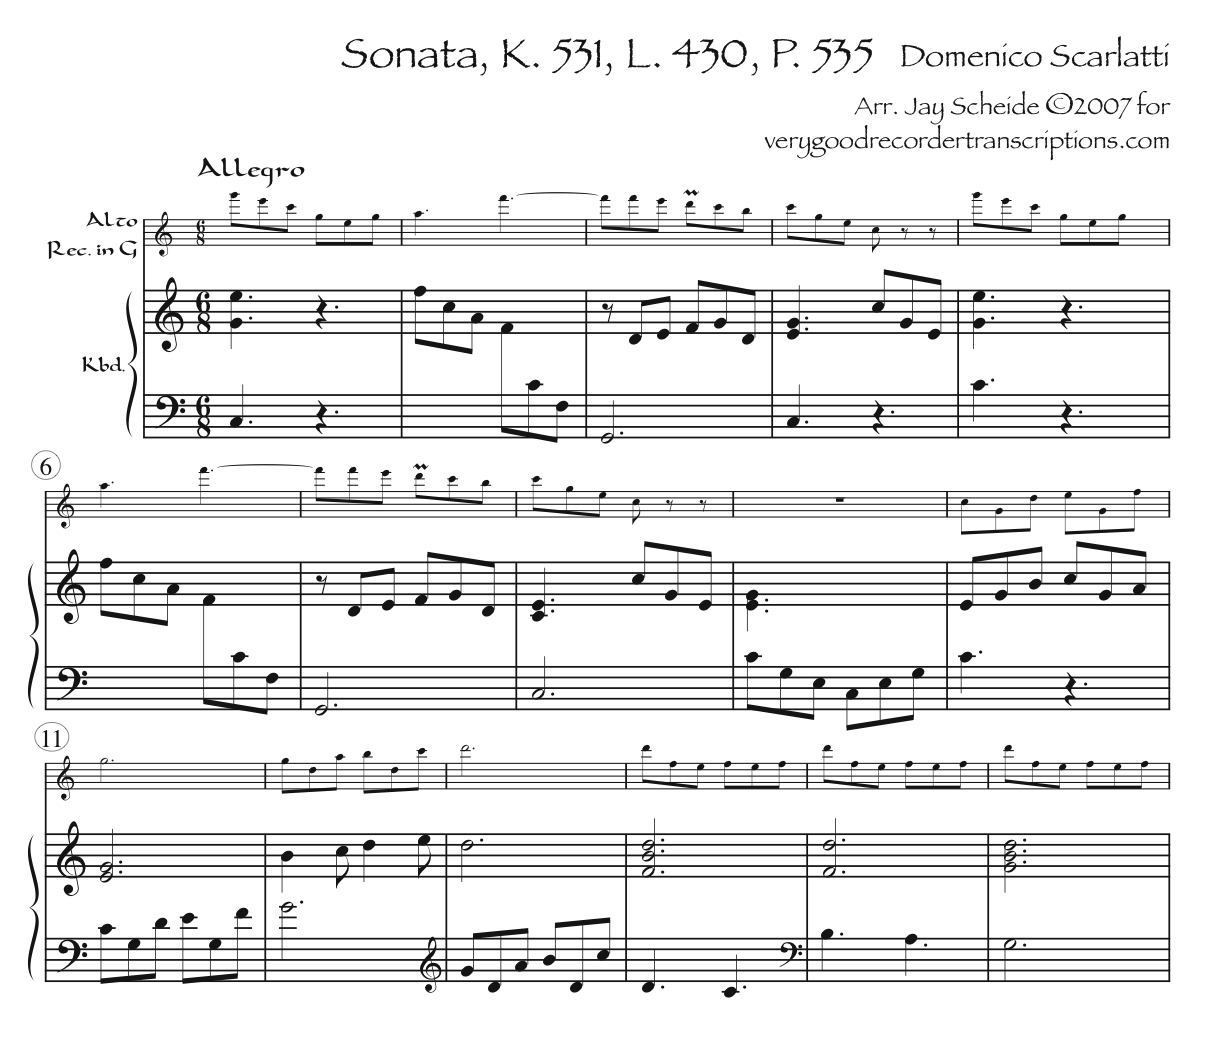 Sonata K. 531, L. 430, P. 535, for alto in G, with optional switch to alto in F